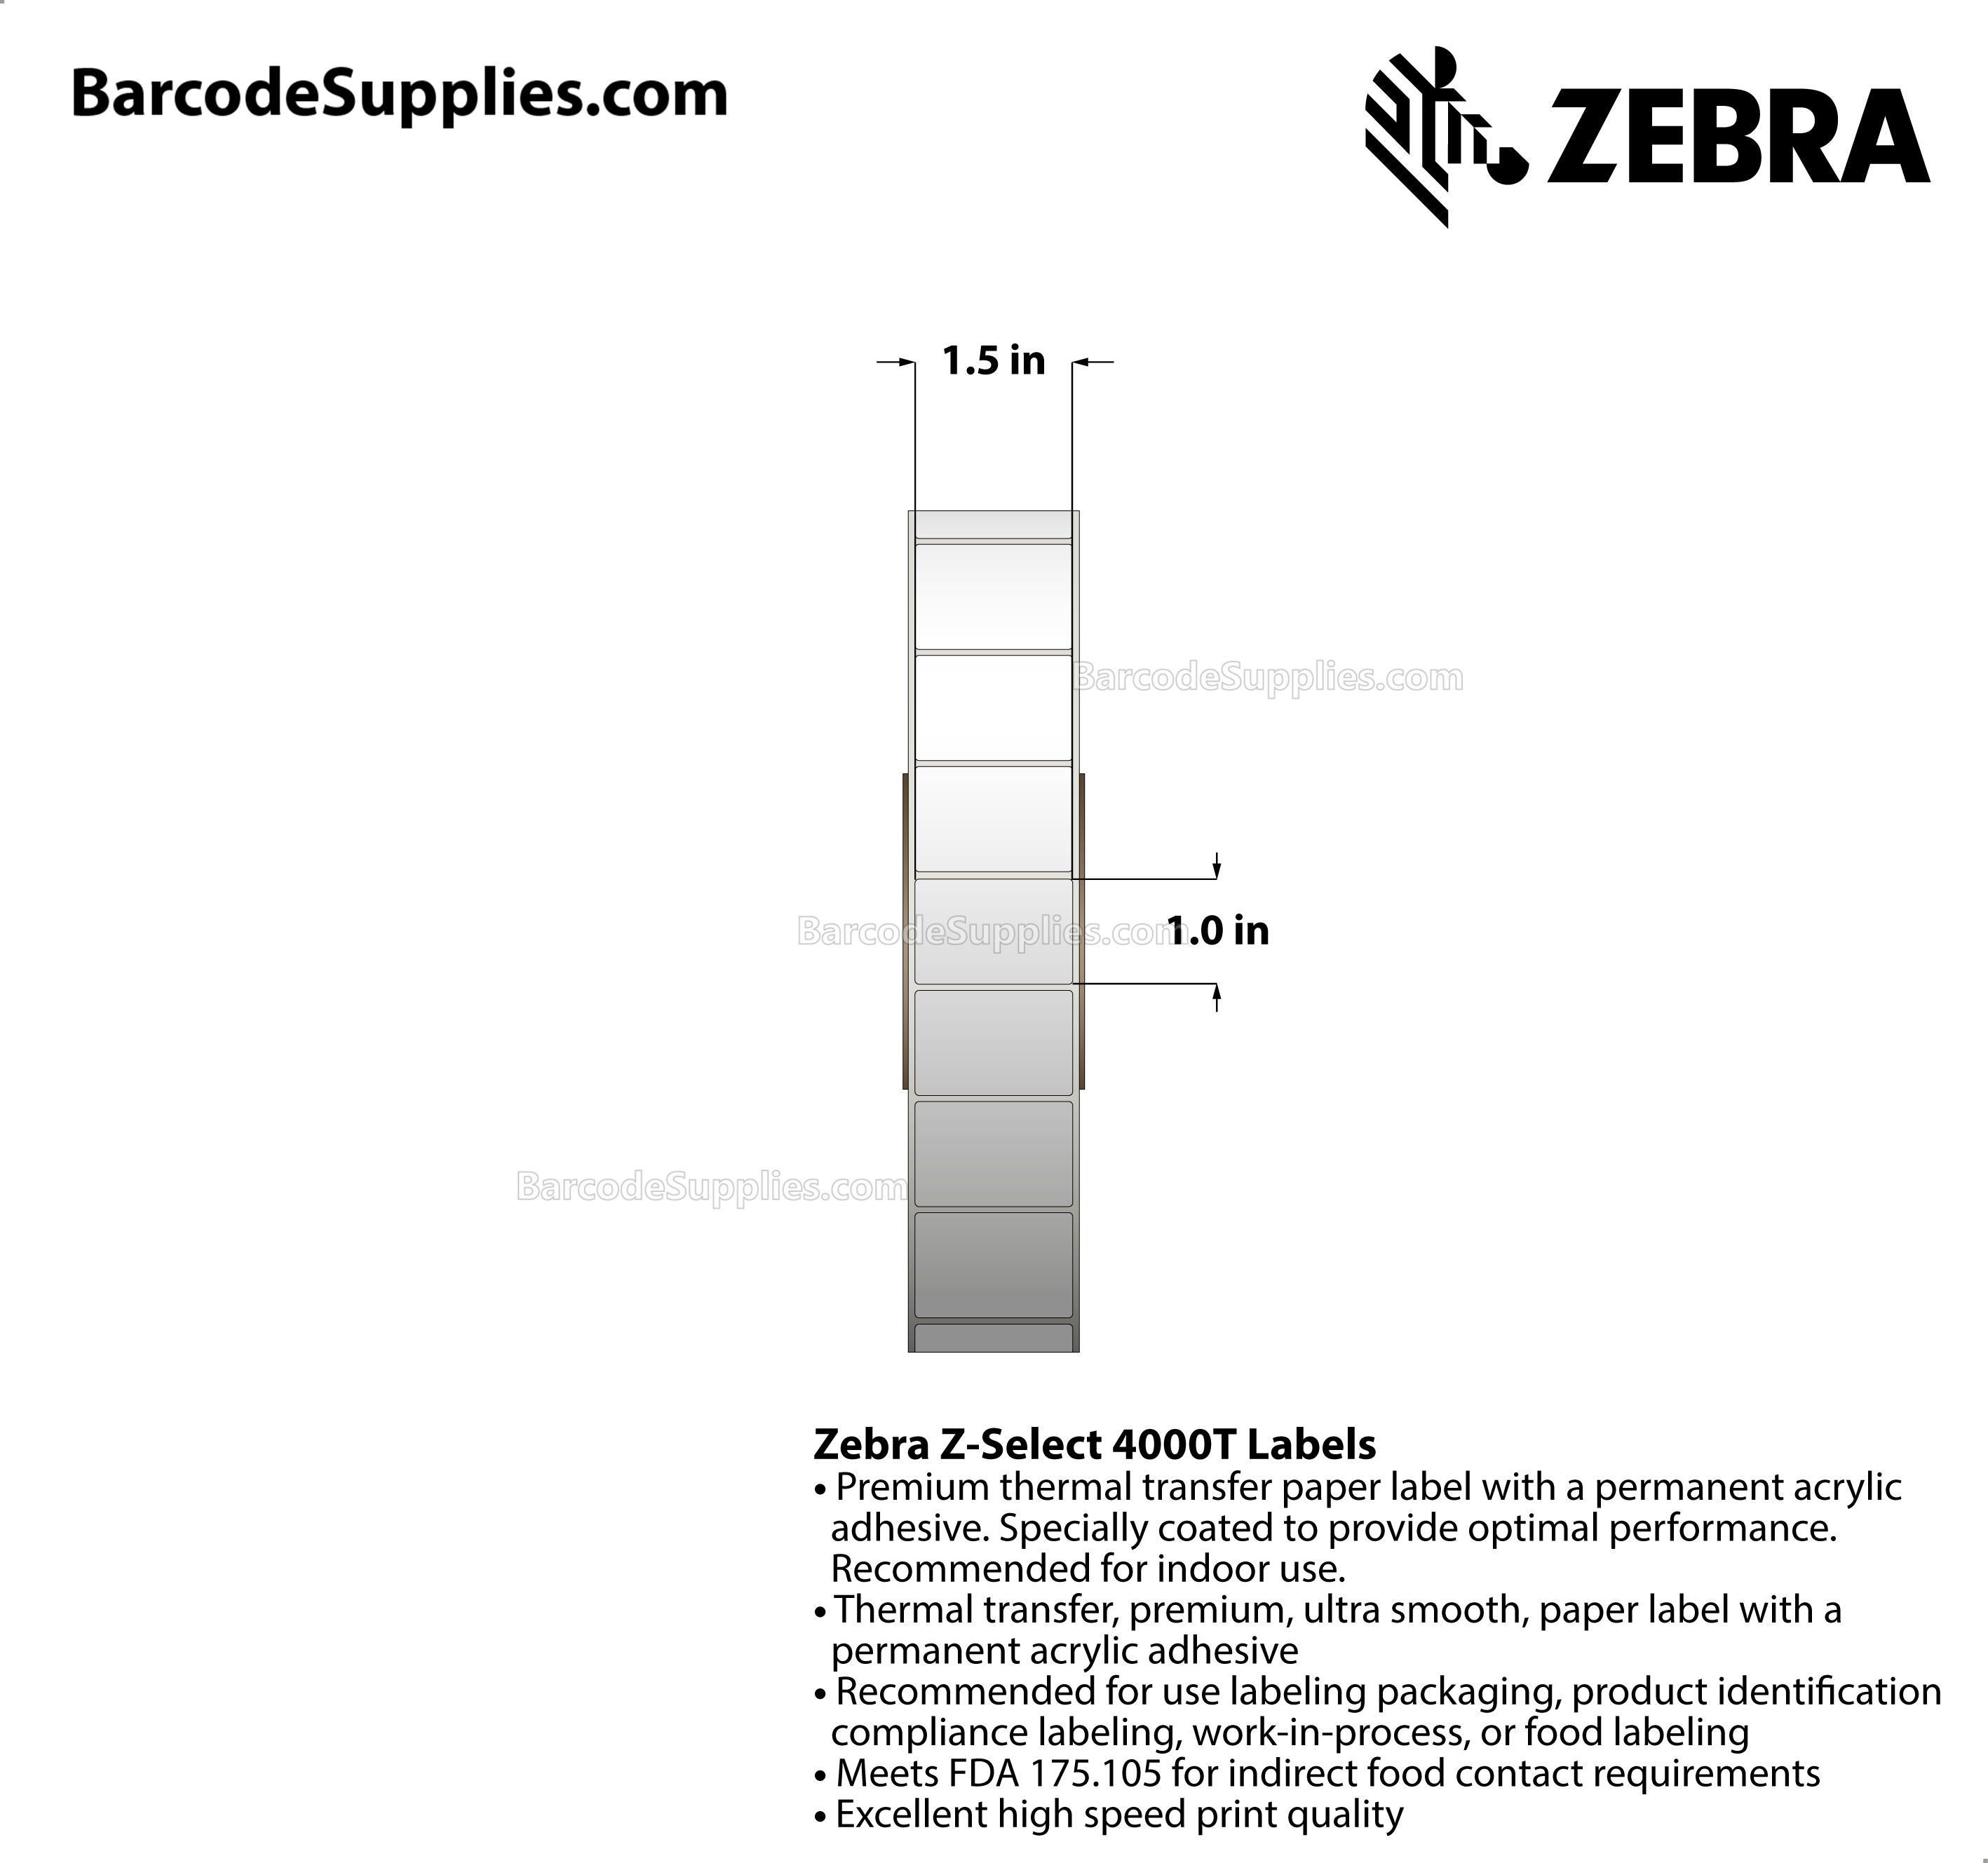 1.5 x 1 Thermal Transfer White Z-Select 4000T Labels With Permanent Adhesive - Not Perforated - 5180 Labels Per Roll - Carton Of 14 Rolls - 72520 Labels Total - MPN: 72280